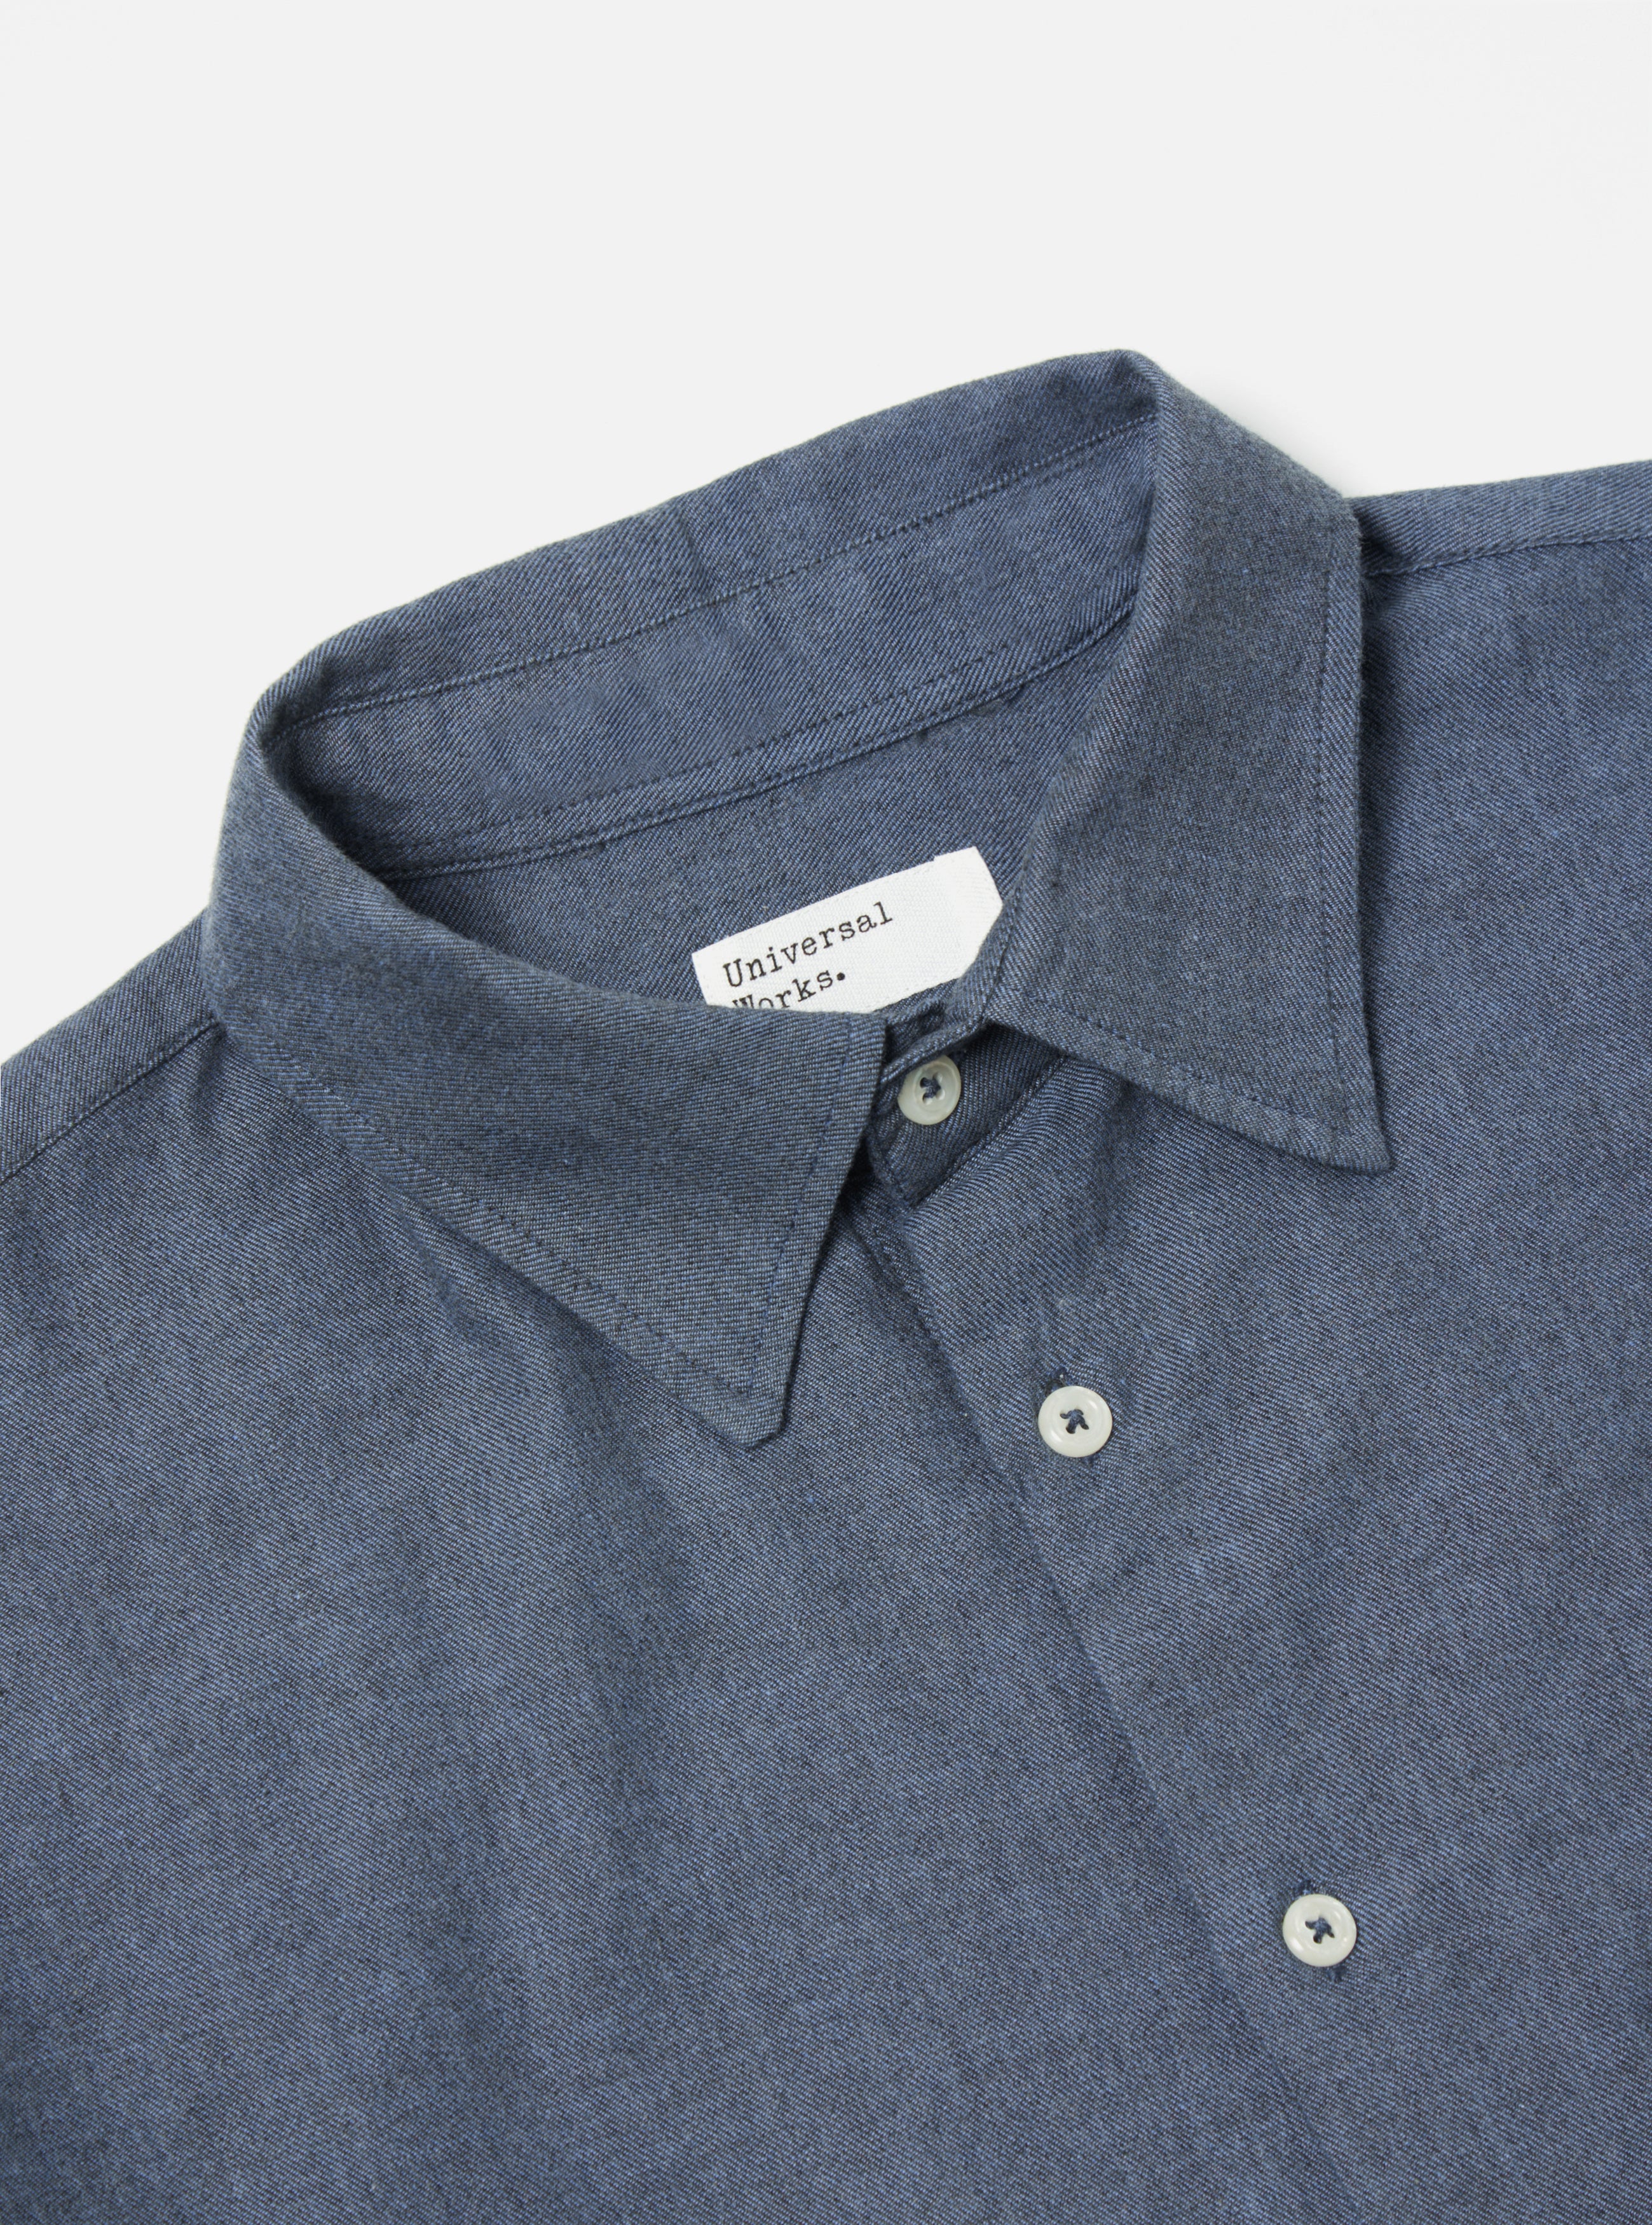 Universal Works Square Pocket Shirt in Blue IT Brushed Twill